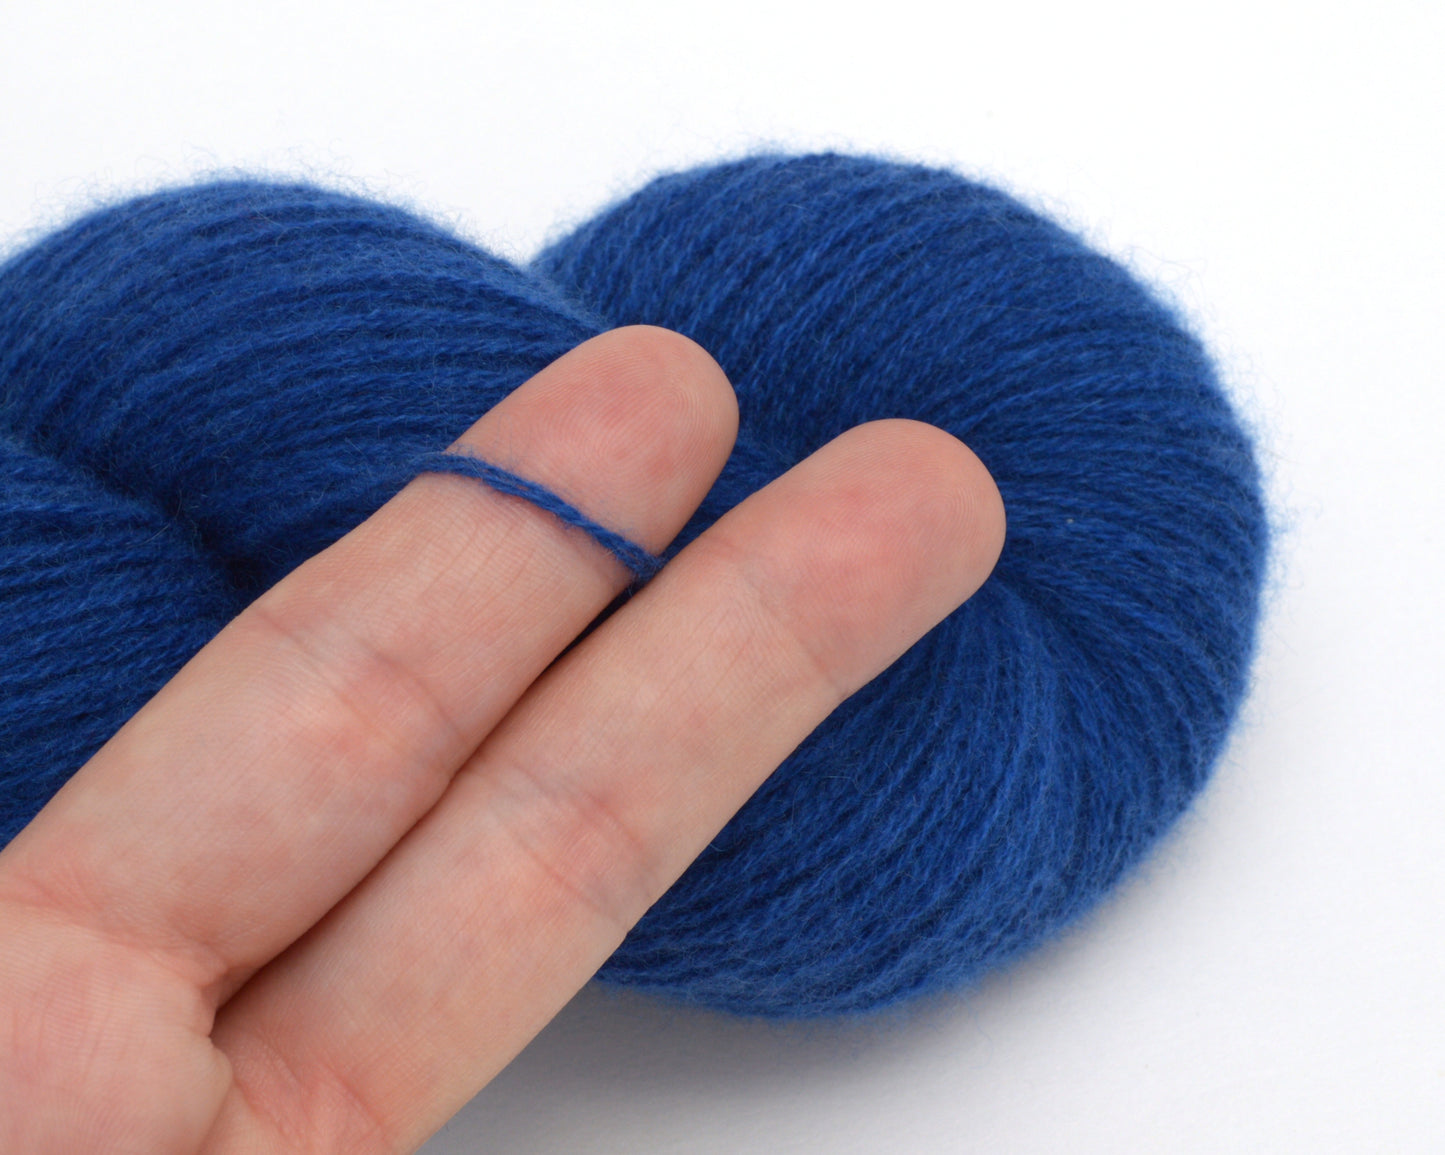 Fingering Weight Recycled Cashmere Yarn in Nautical Blue